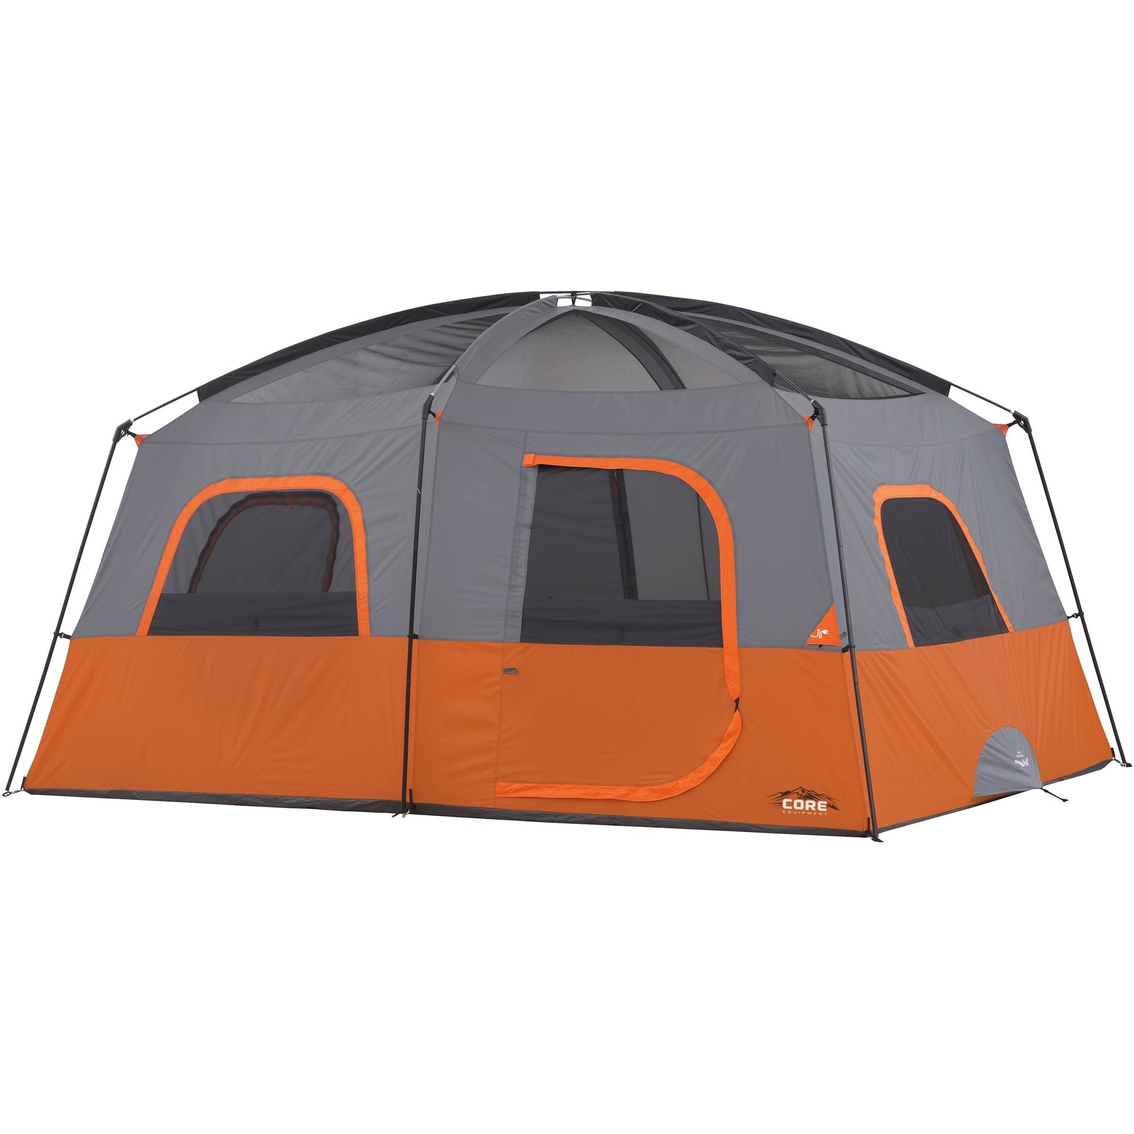 Core Equipment 10 Person Straight Wall Cabin Tent, Tents